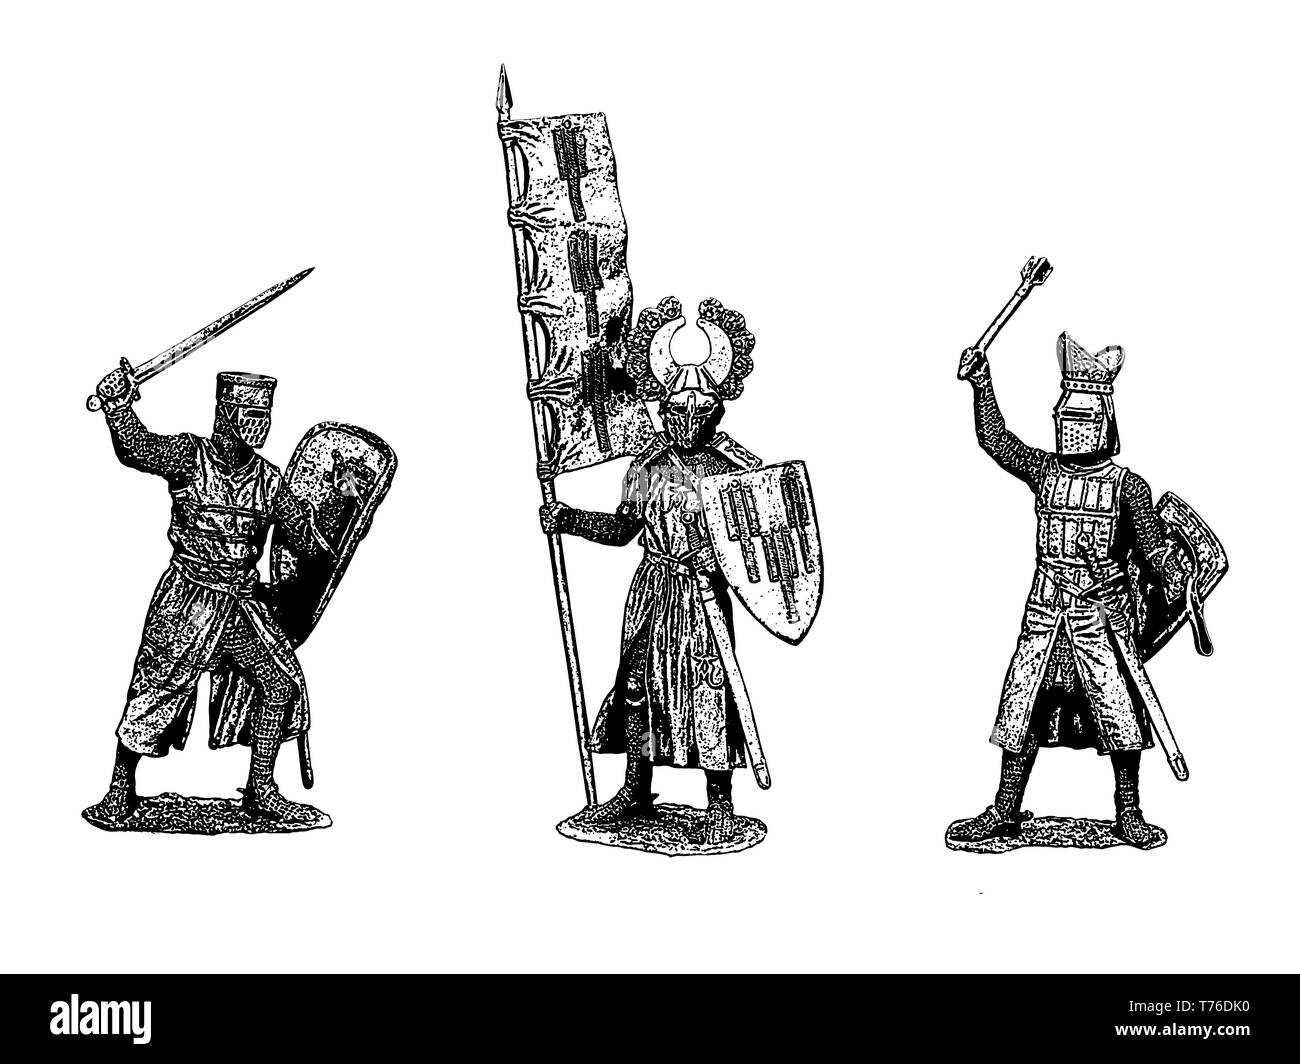 Medieval knights illustration. Knight picture. Set of 3 medieval crusaders. Digital drawing. Stock Photo